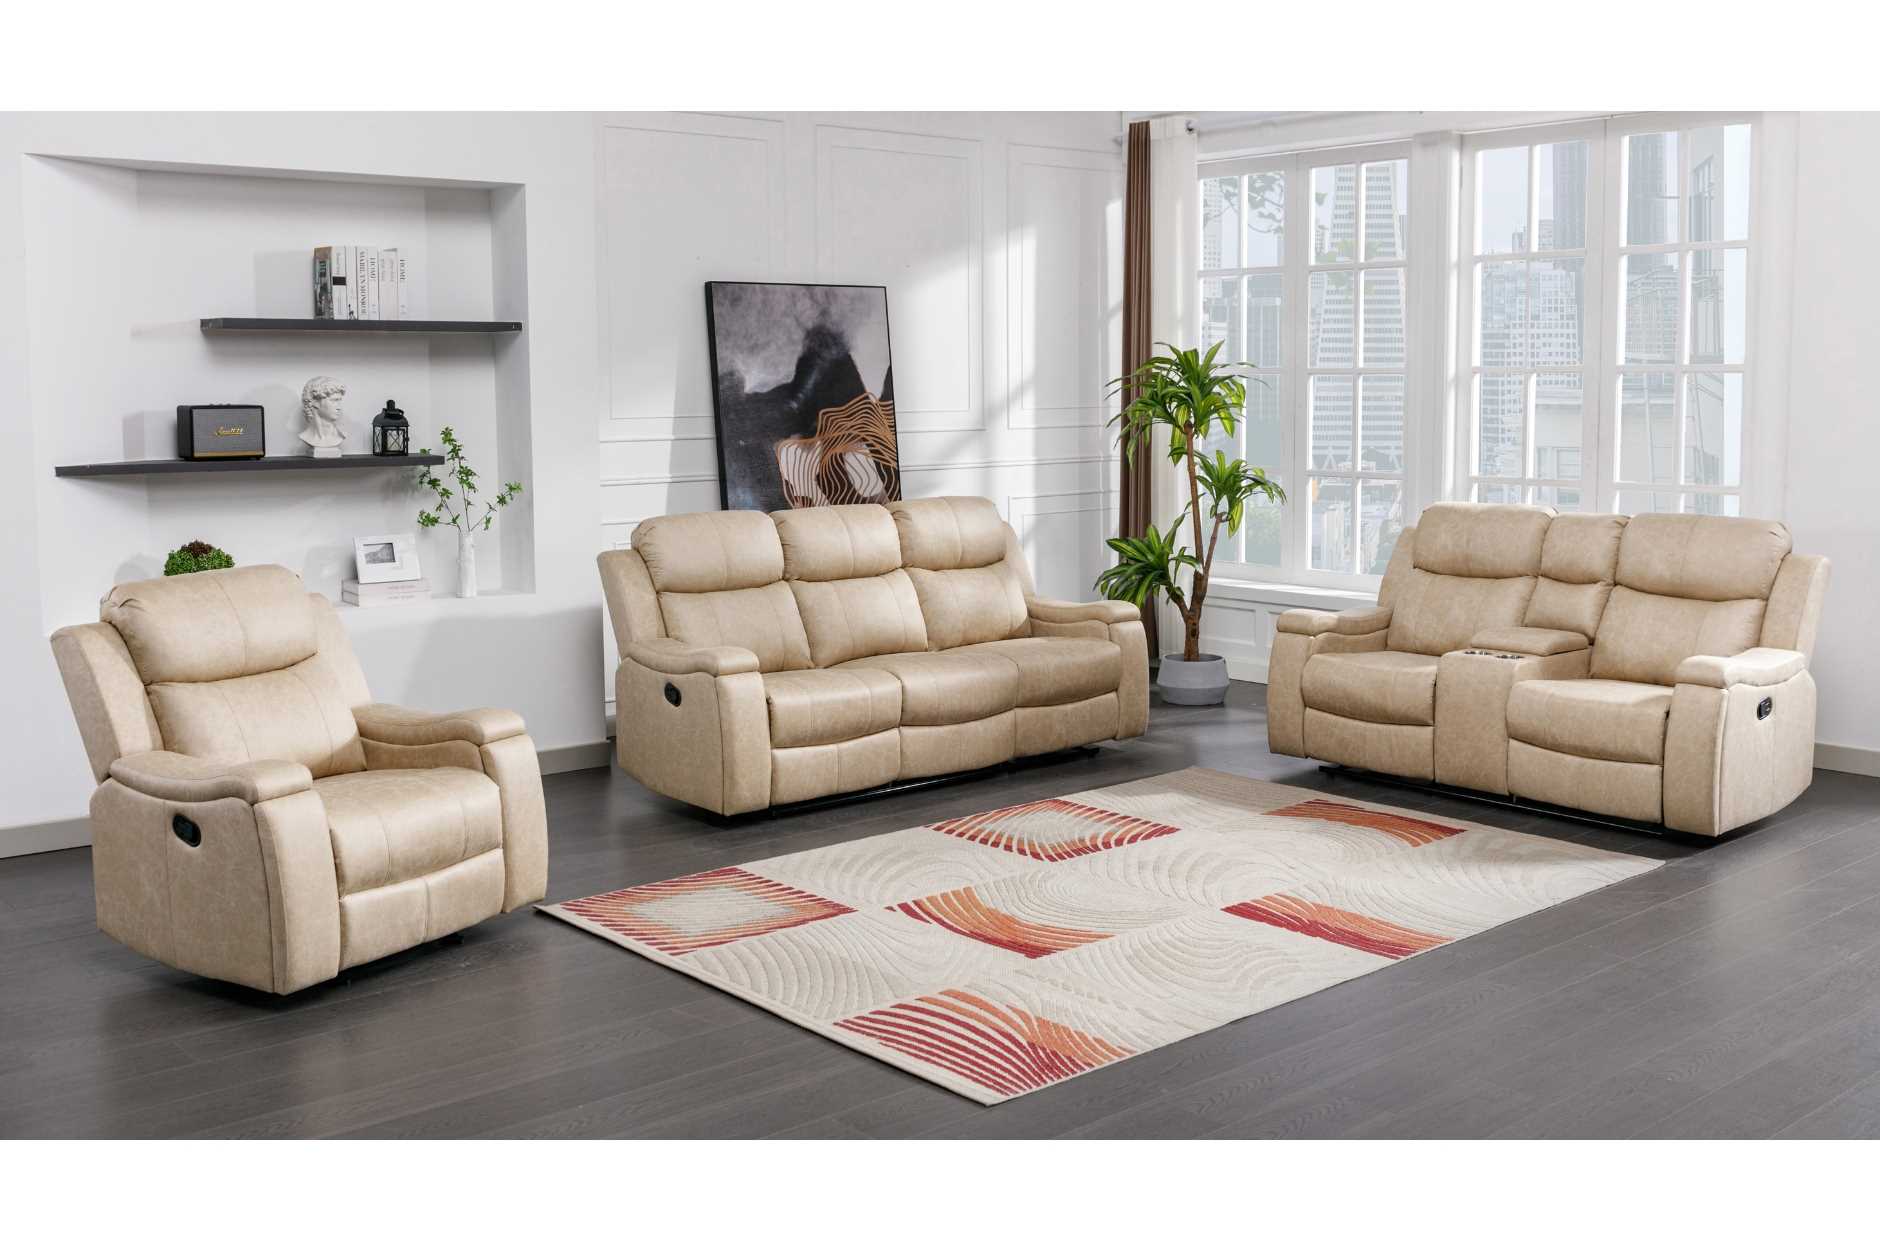 Bradford Reclining Collection Polished Microfiber Neutral Buff Tone 99990